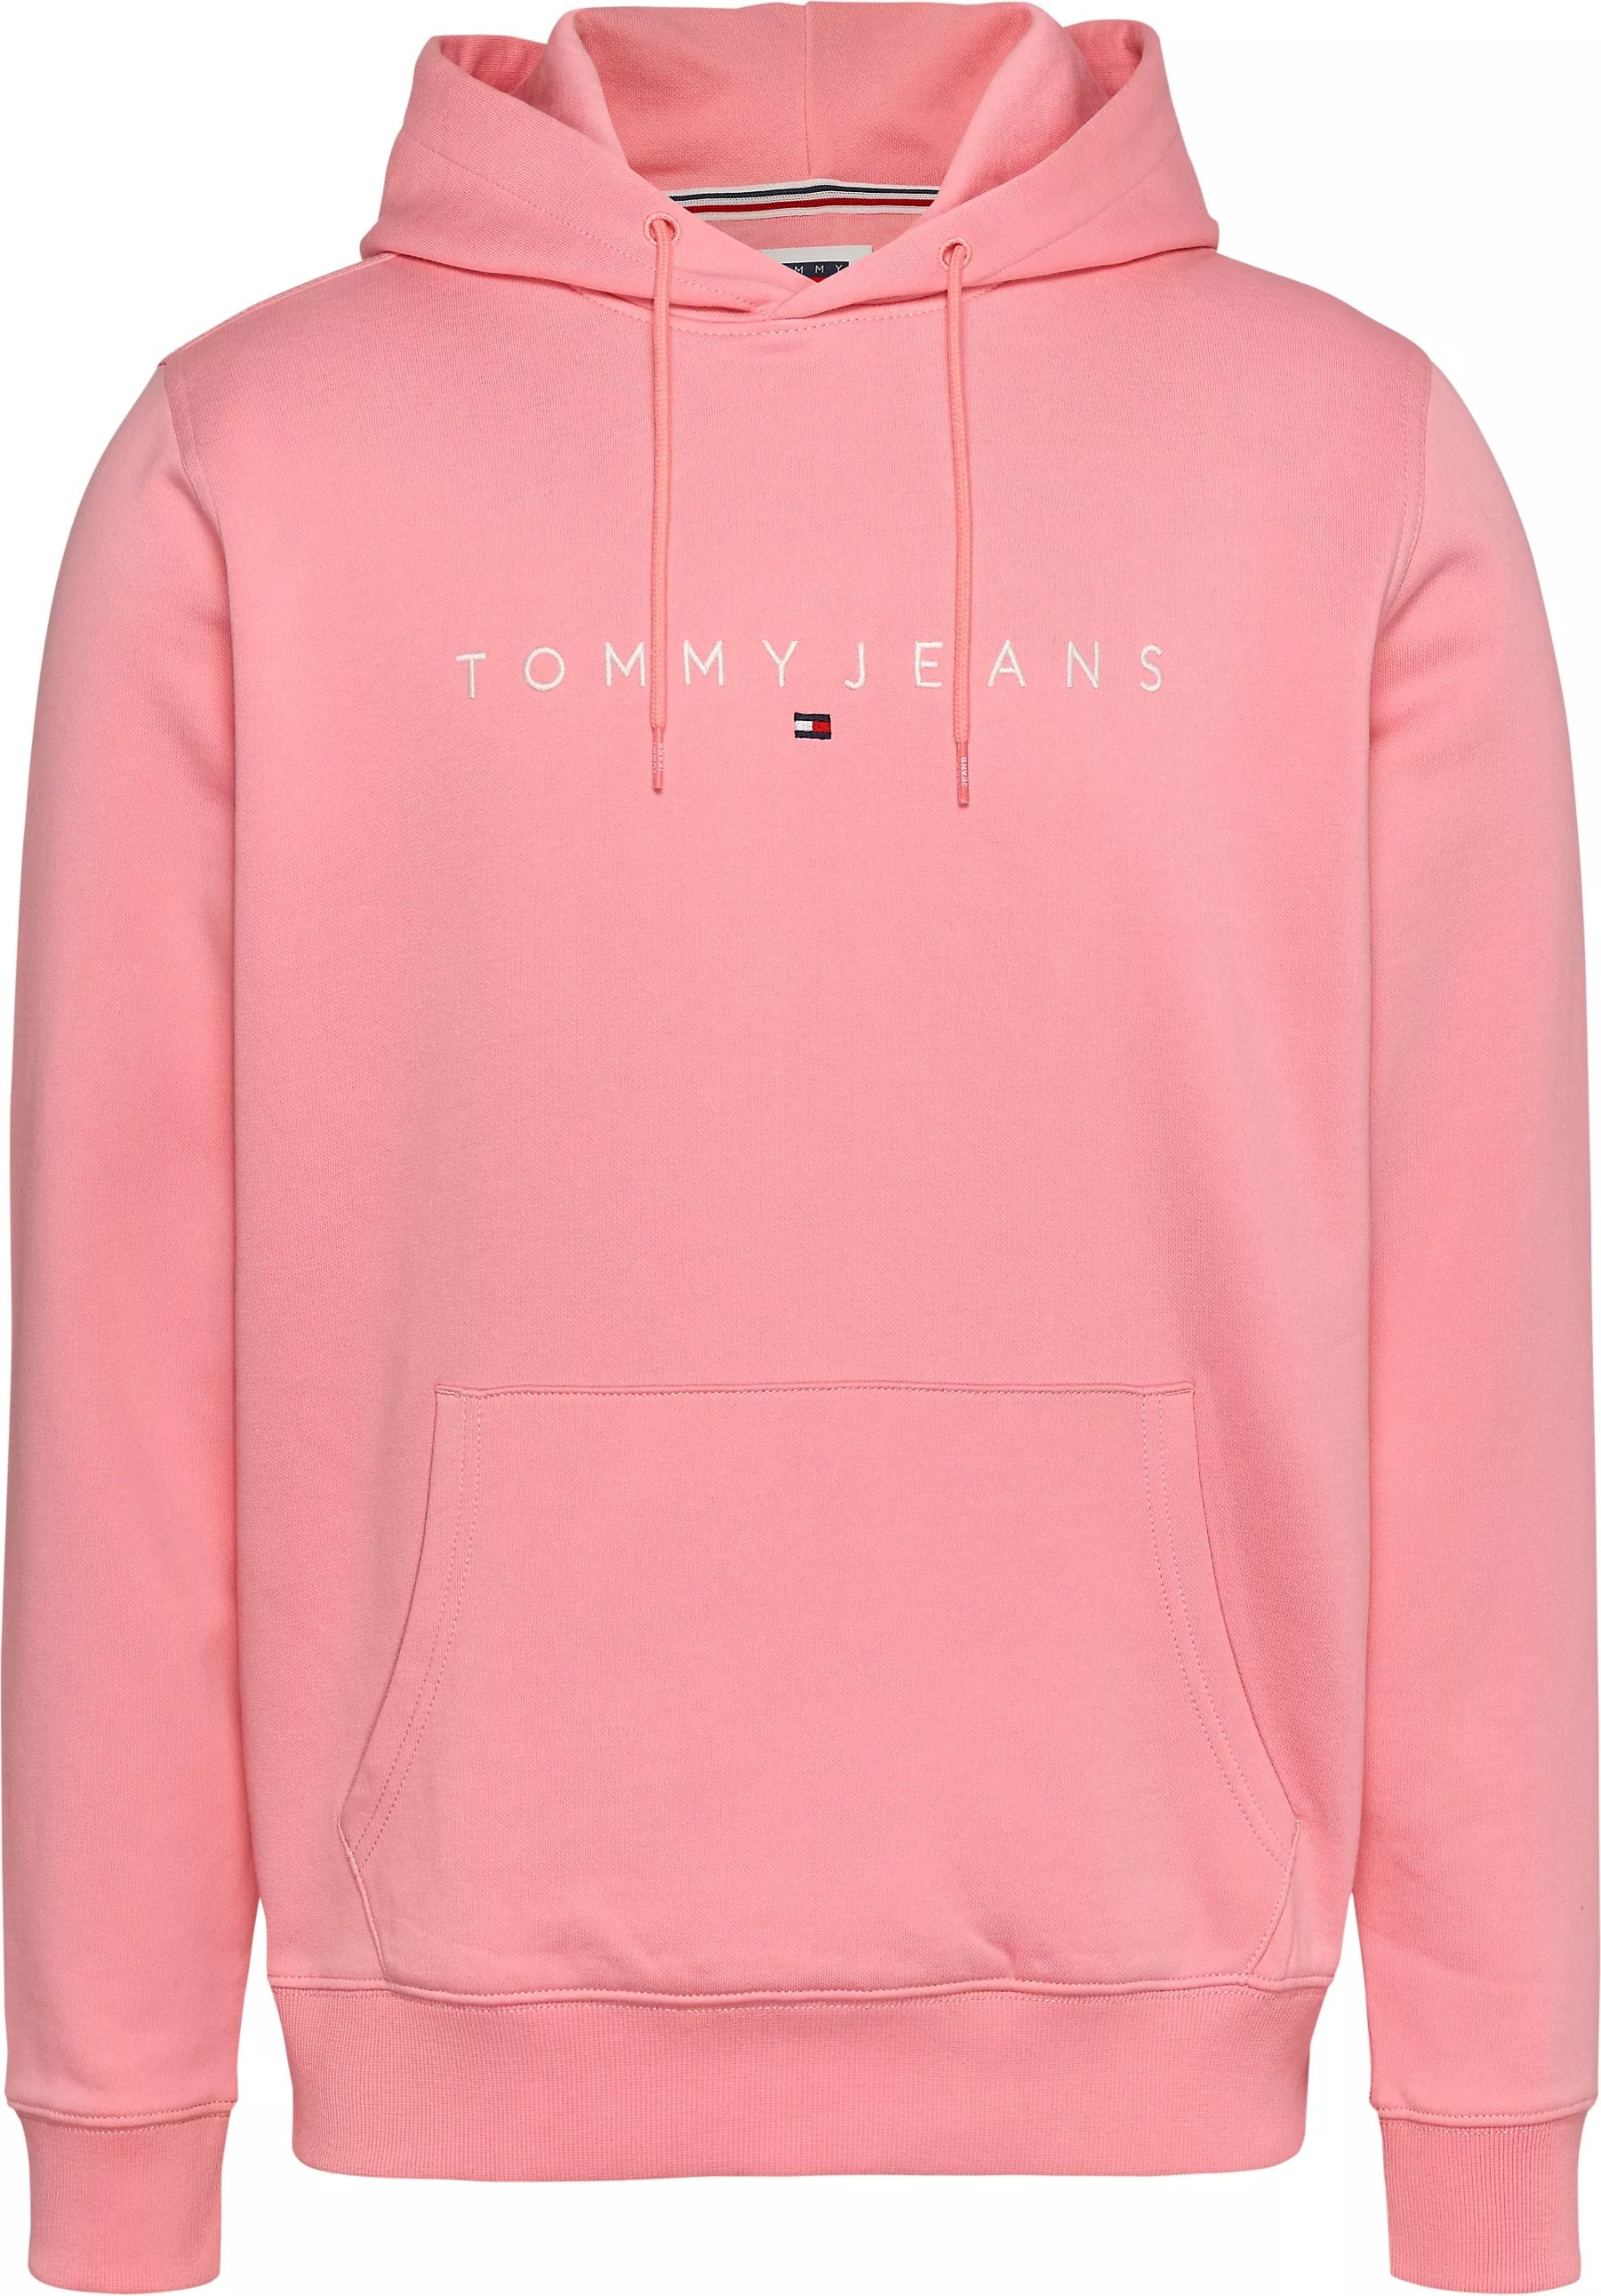 SUDADERA CAPUCHA TOMMY JEANS MAN REGULAR LINEAR LOGO HOODIE EXT TICKLED PINK